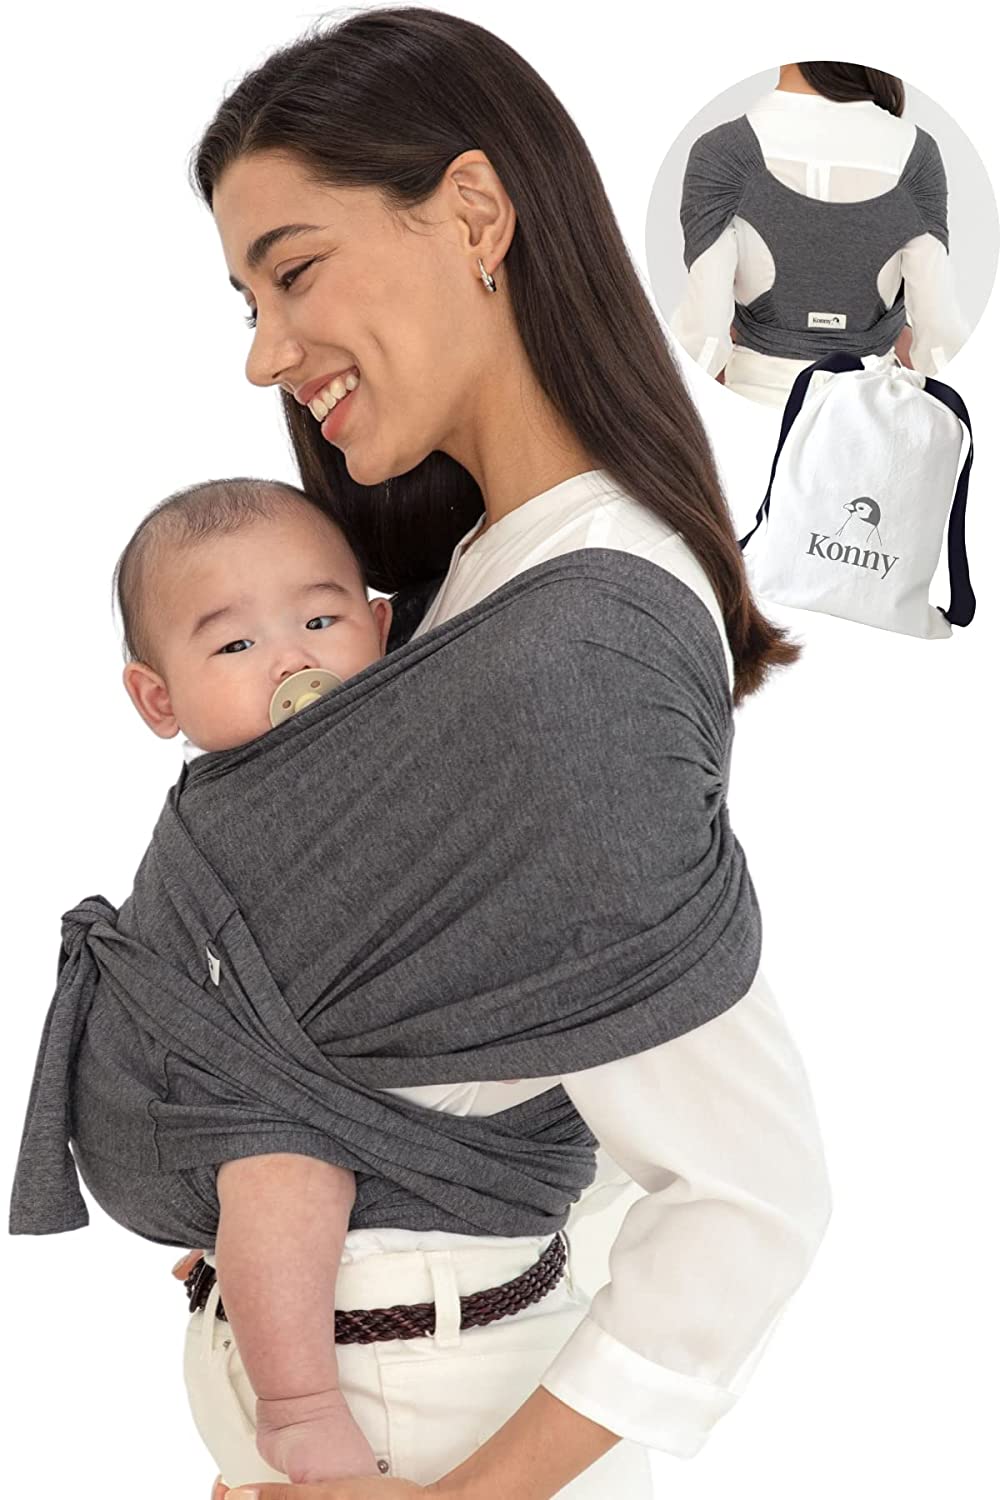 Konny Baby Carrier | Ultra-Light, Easy Swaddle | Newborns, Infants up to 20 kg Toddlers | Soft and Breathable Fabric | Useful Sleep Solution (Anthracite, M)